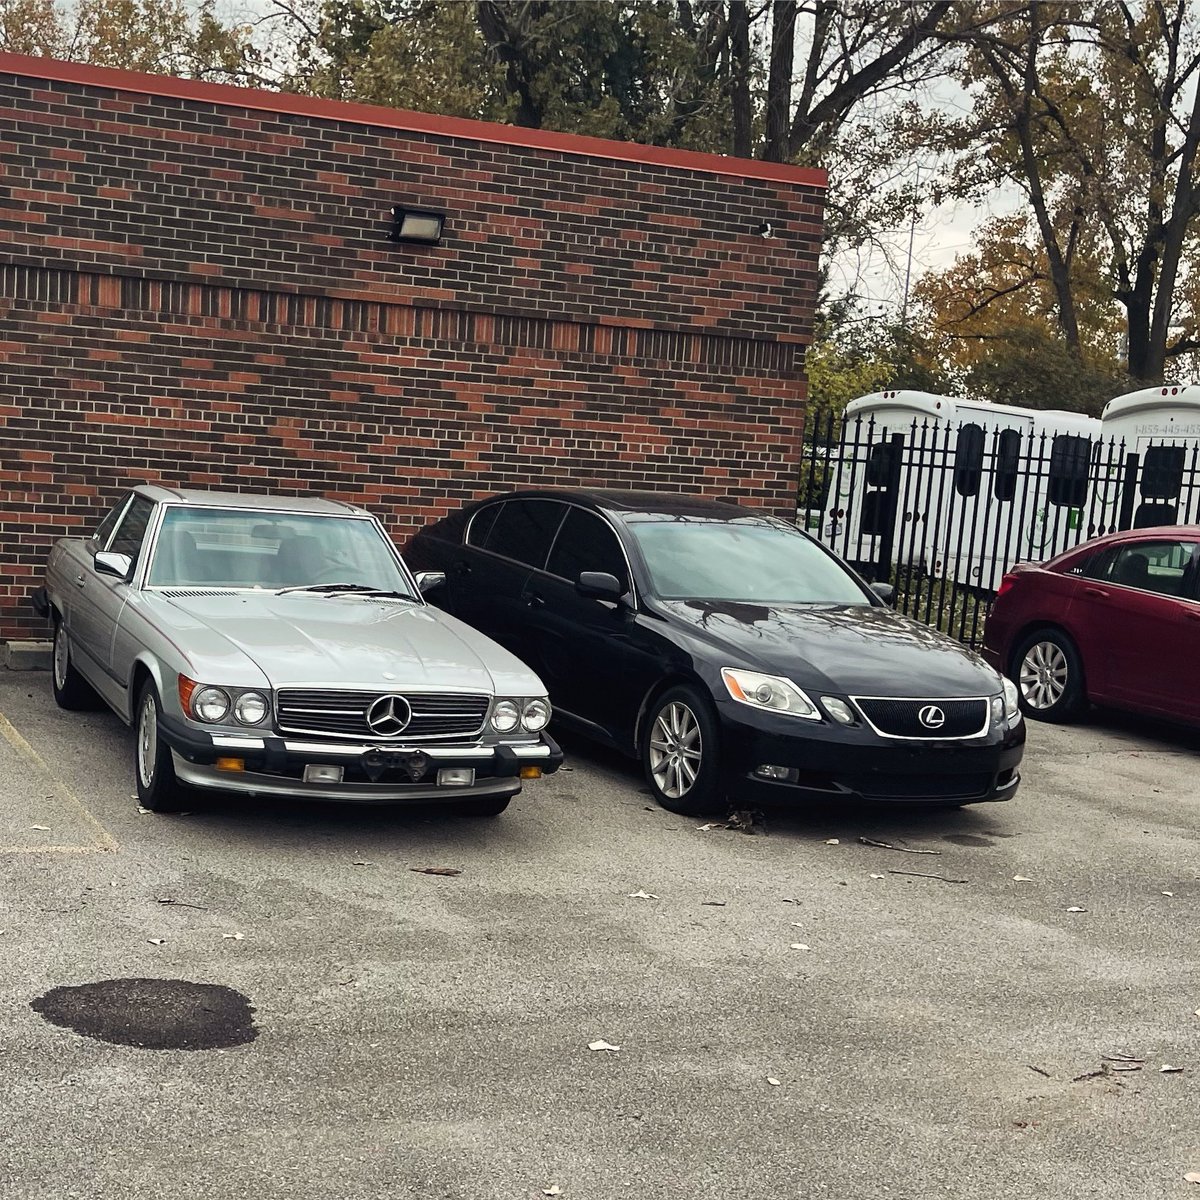 Fresh off the delivery truck, ready to roll into their new town! 🏙️ 

#carshipping #autotransport #shipmycar #vehicleshipping #usa #avftsshipping